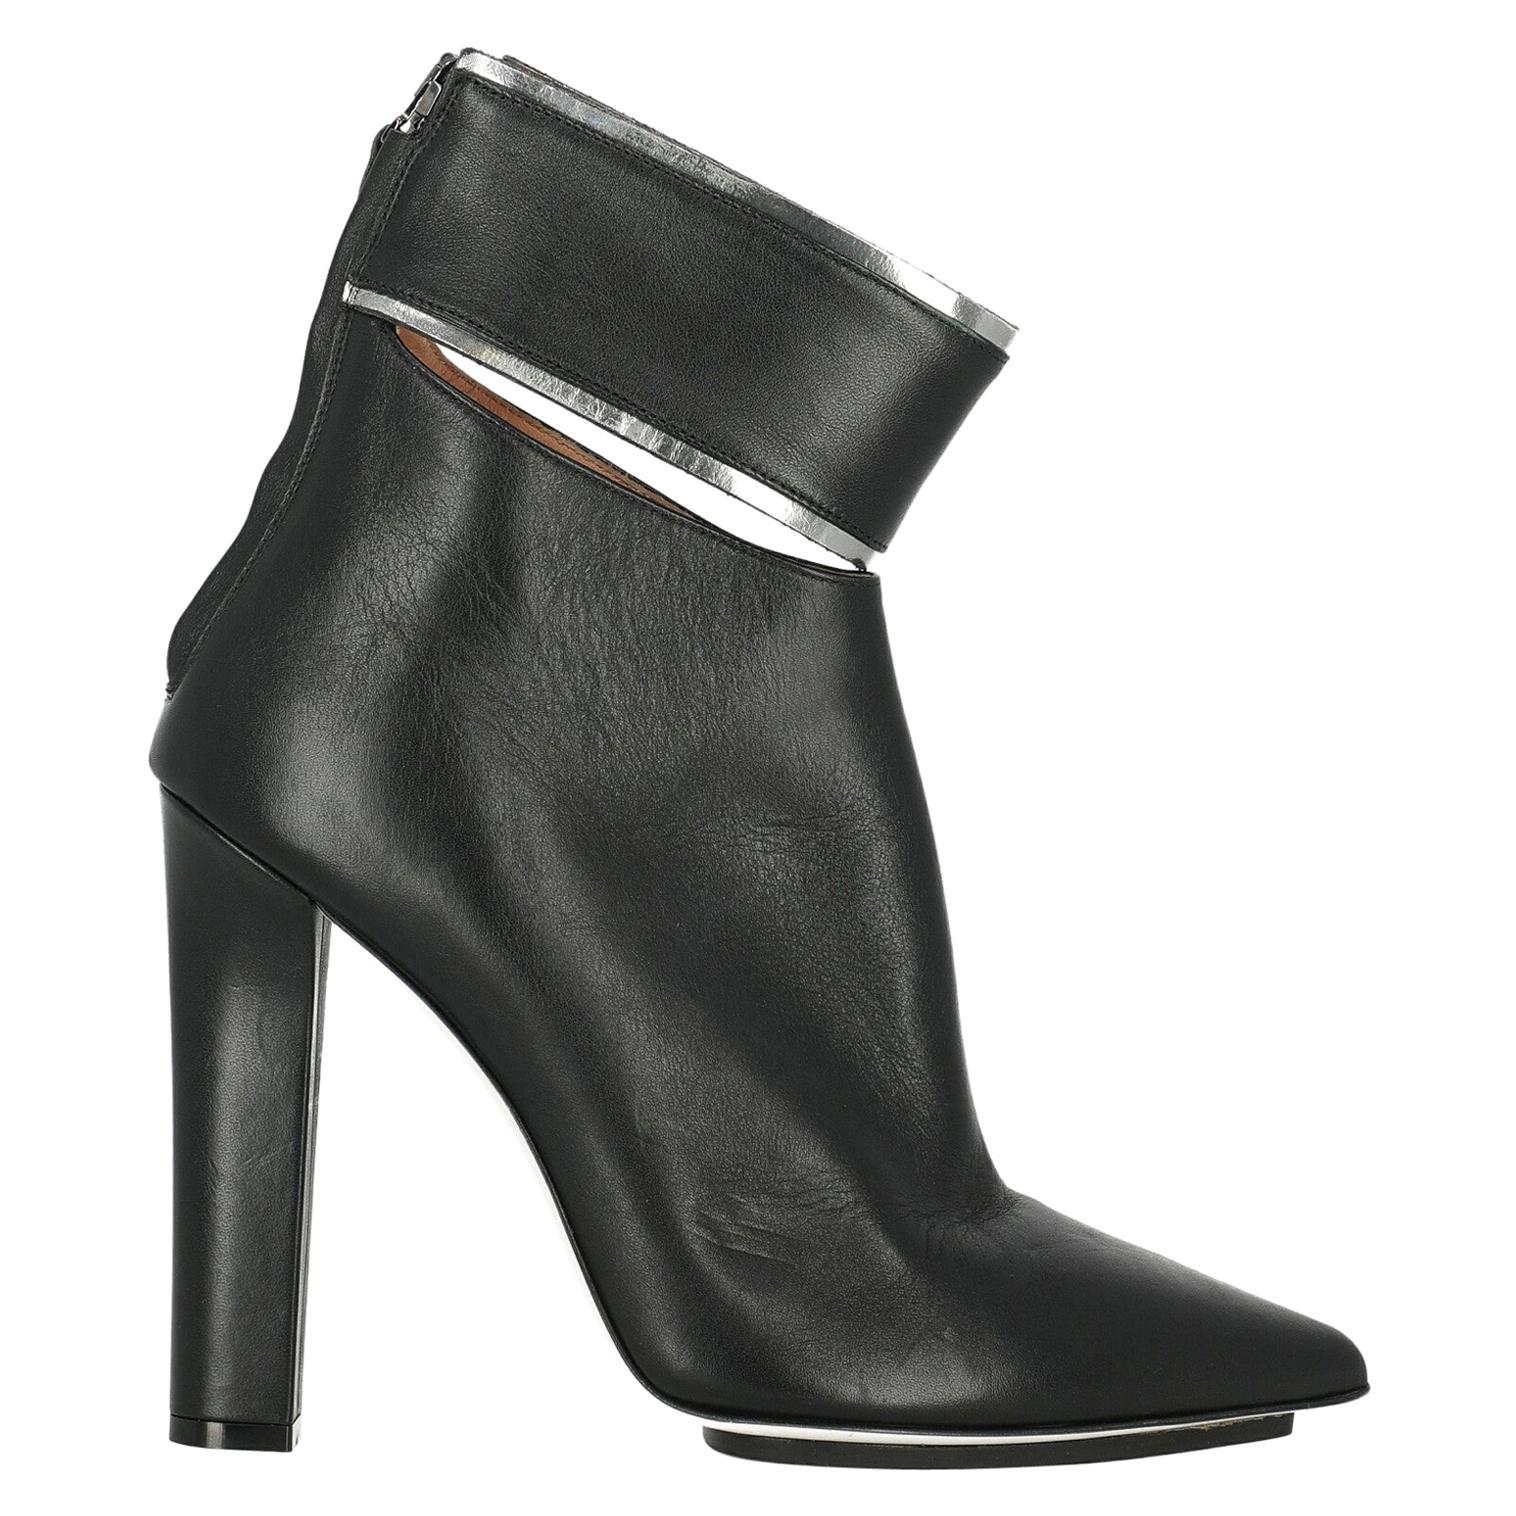 Gianfranco Ferre Woman Ankle boots Black Leather IT 40 For Sale